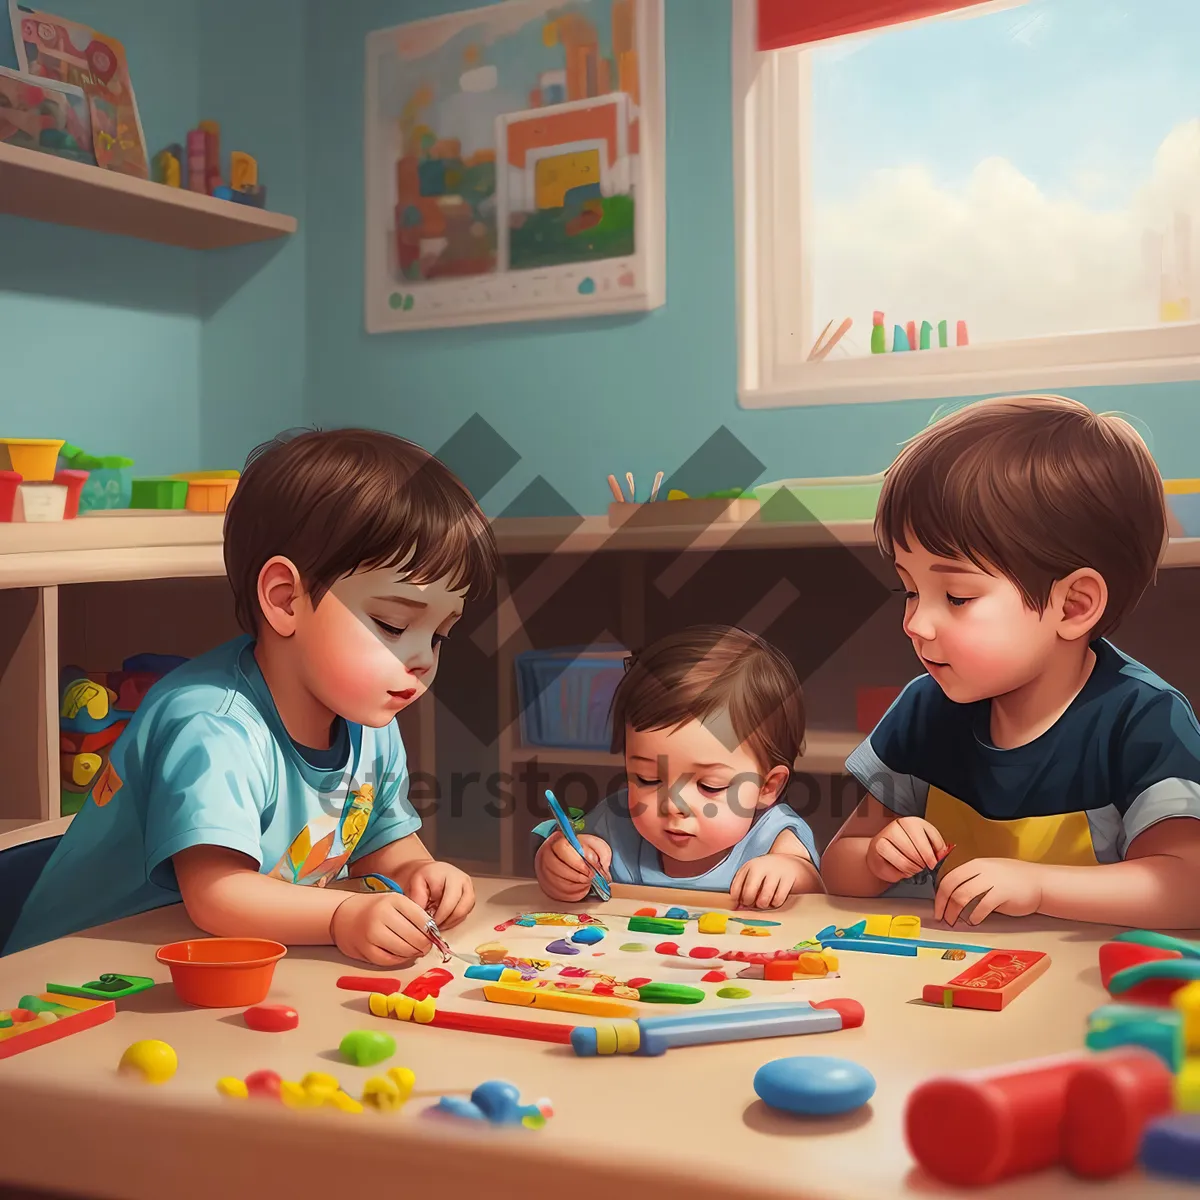 Picture of Happy children learning and playing together in a colorful classroom.